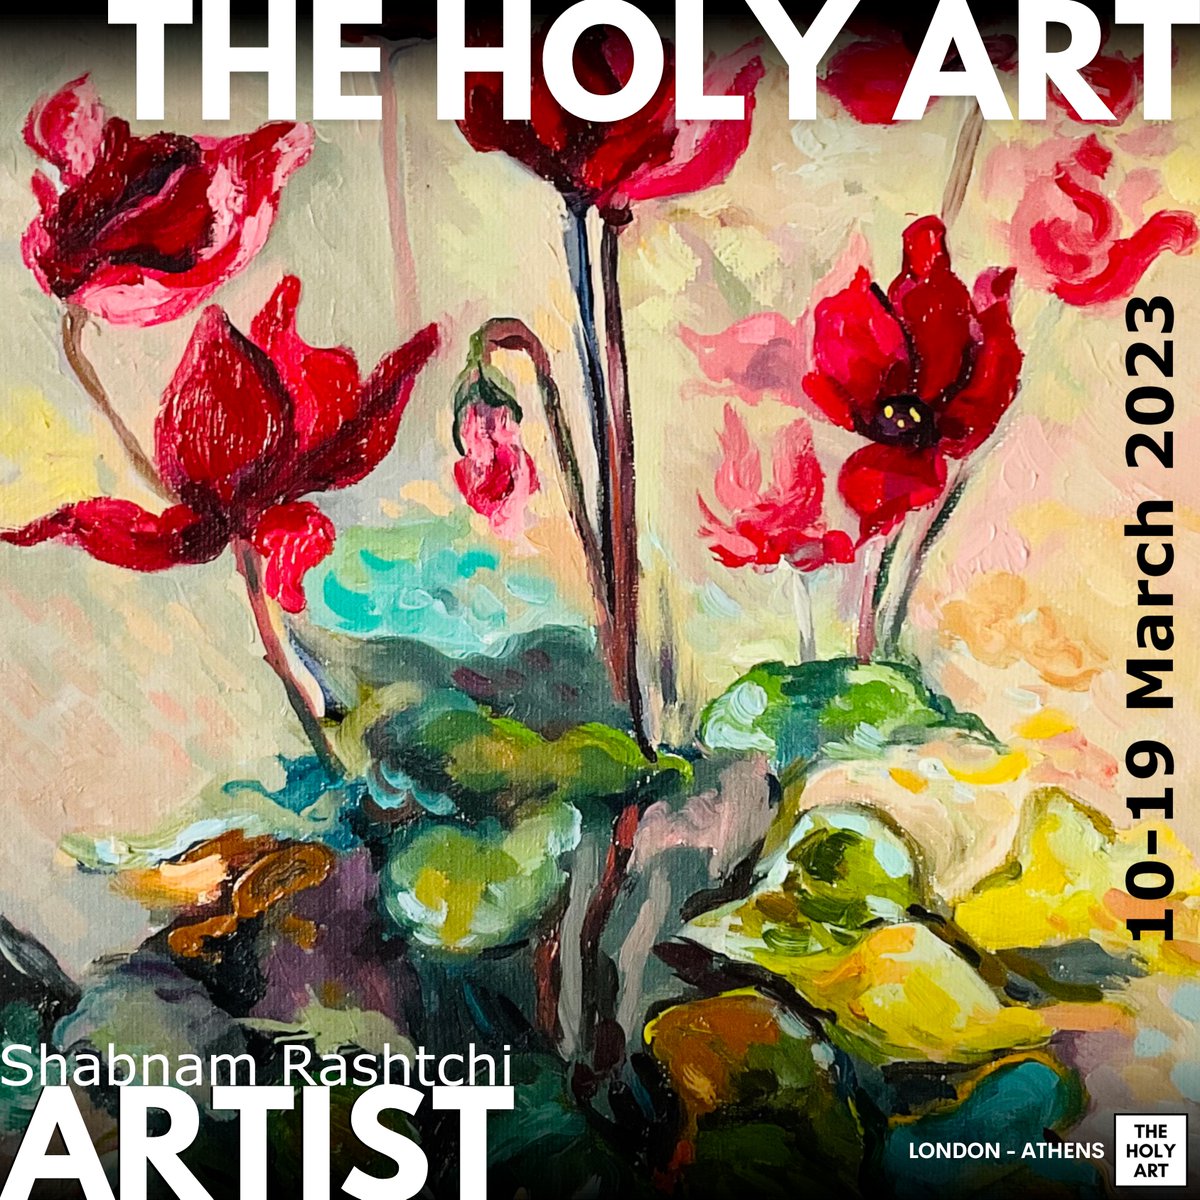 Many thanks to @theholyartgallery for including my artworks in this exhibition in London! 
10 -19 March 2023
instagram.com/p/CpdQDGitNCx/
📍 THE FACTORY, 21-31 Shacklewell Ln, London E8 2DA 
#TheHolyArtGallery #THAF2023 #TheHolyArtArtist #staycreative
shabnamrashtchi.wixsite.com/gallery